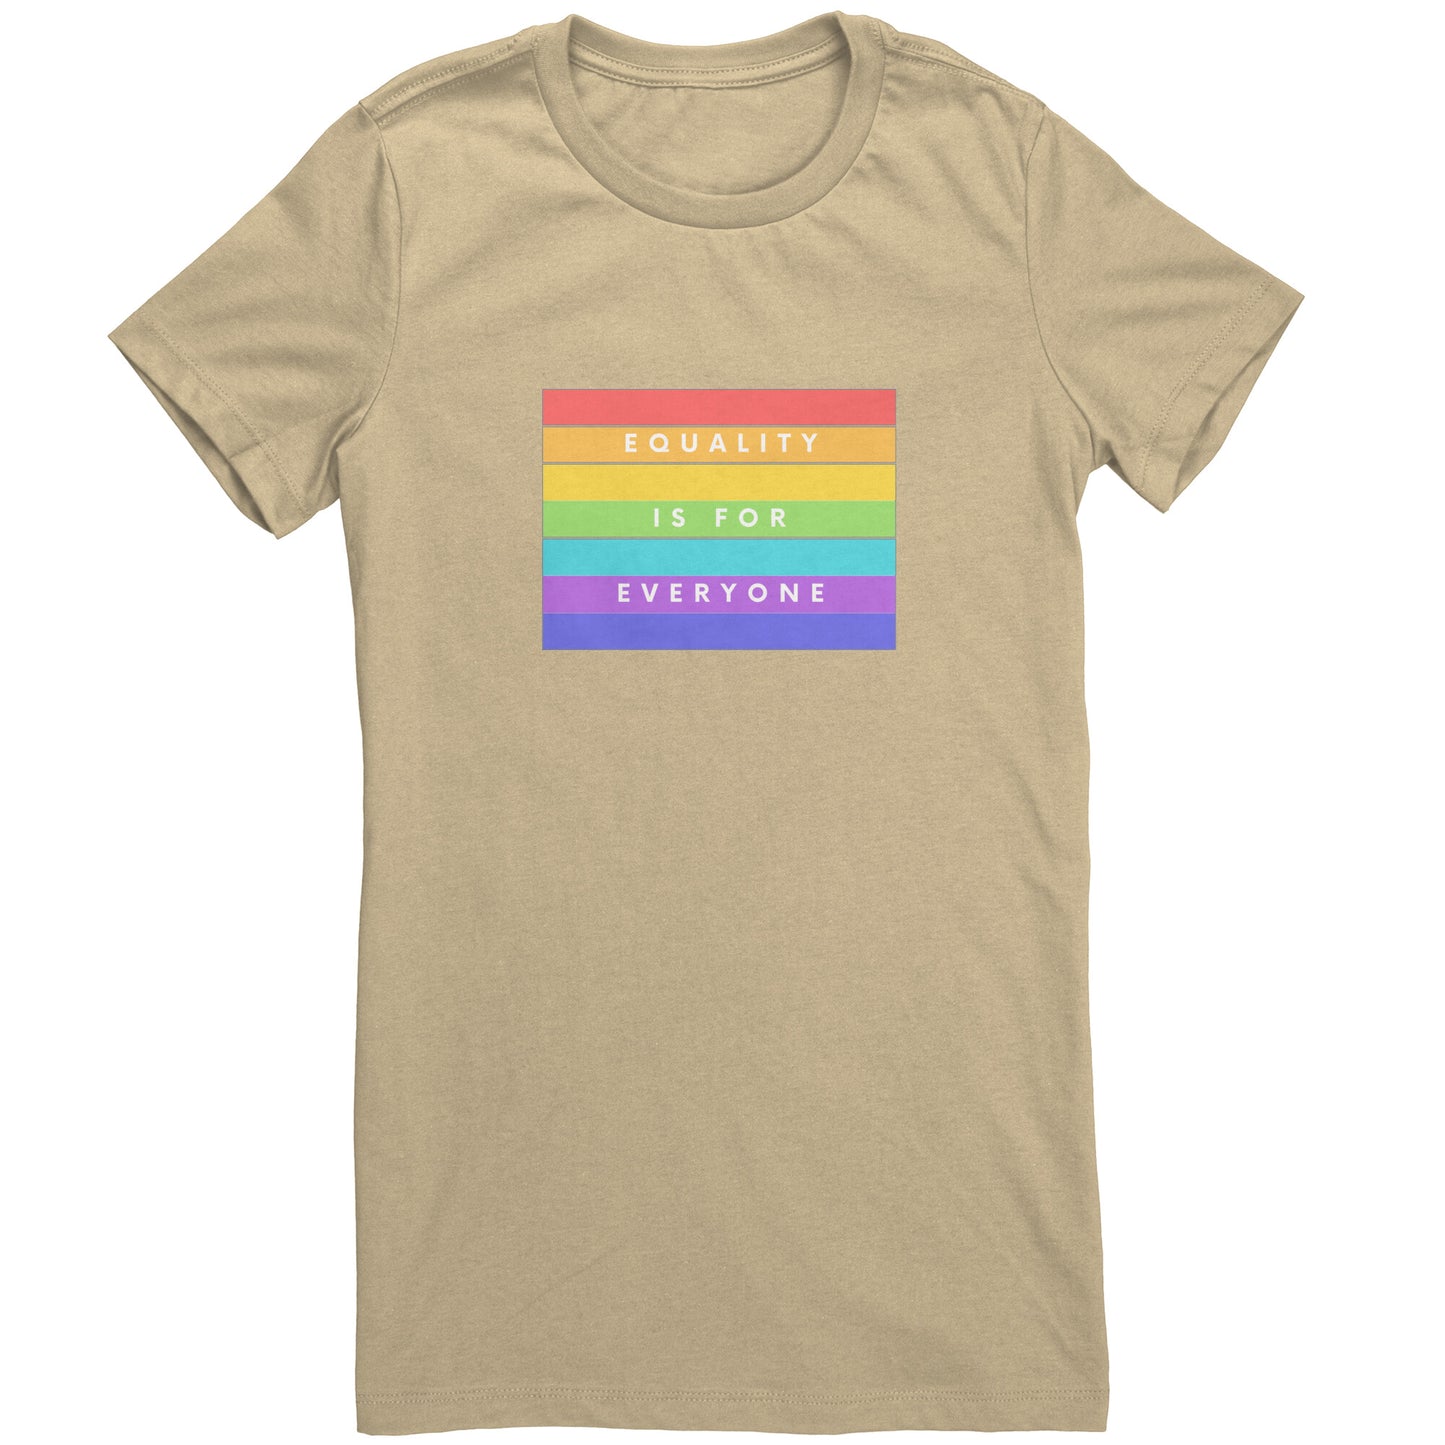 Equality for All Women's T-Shirt